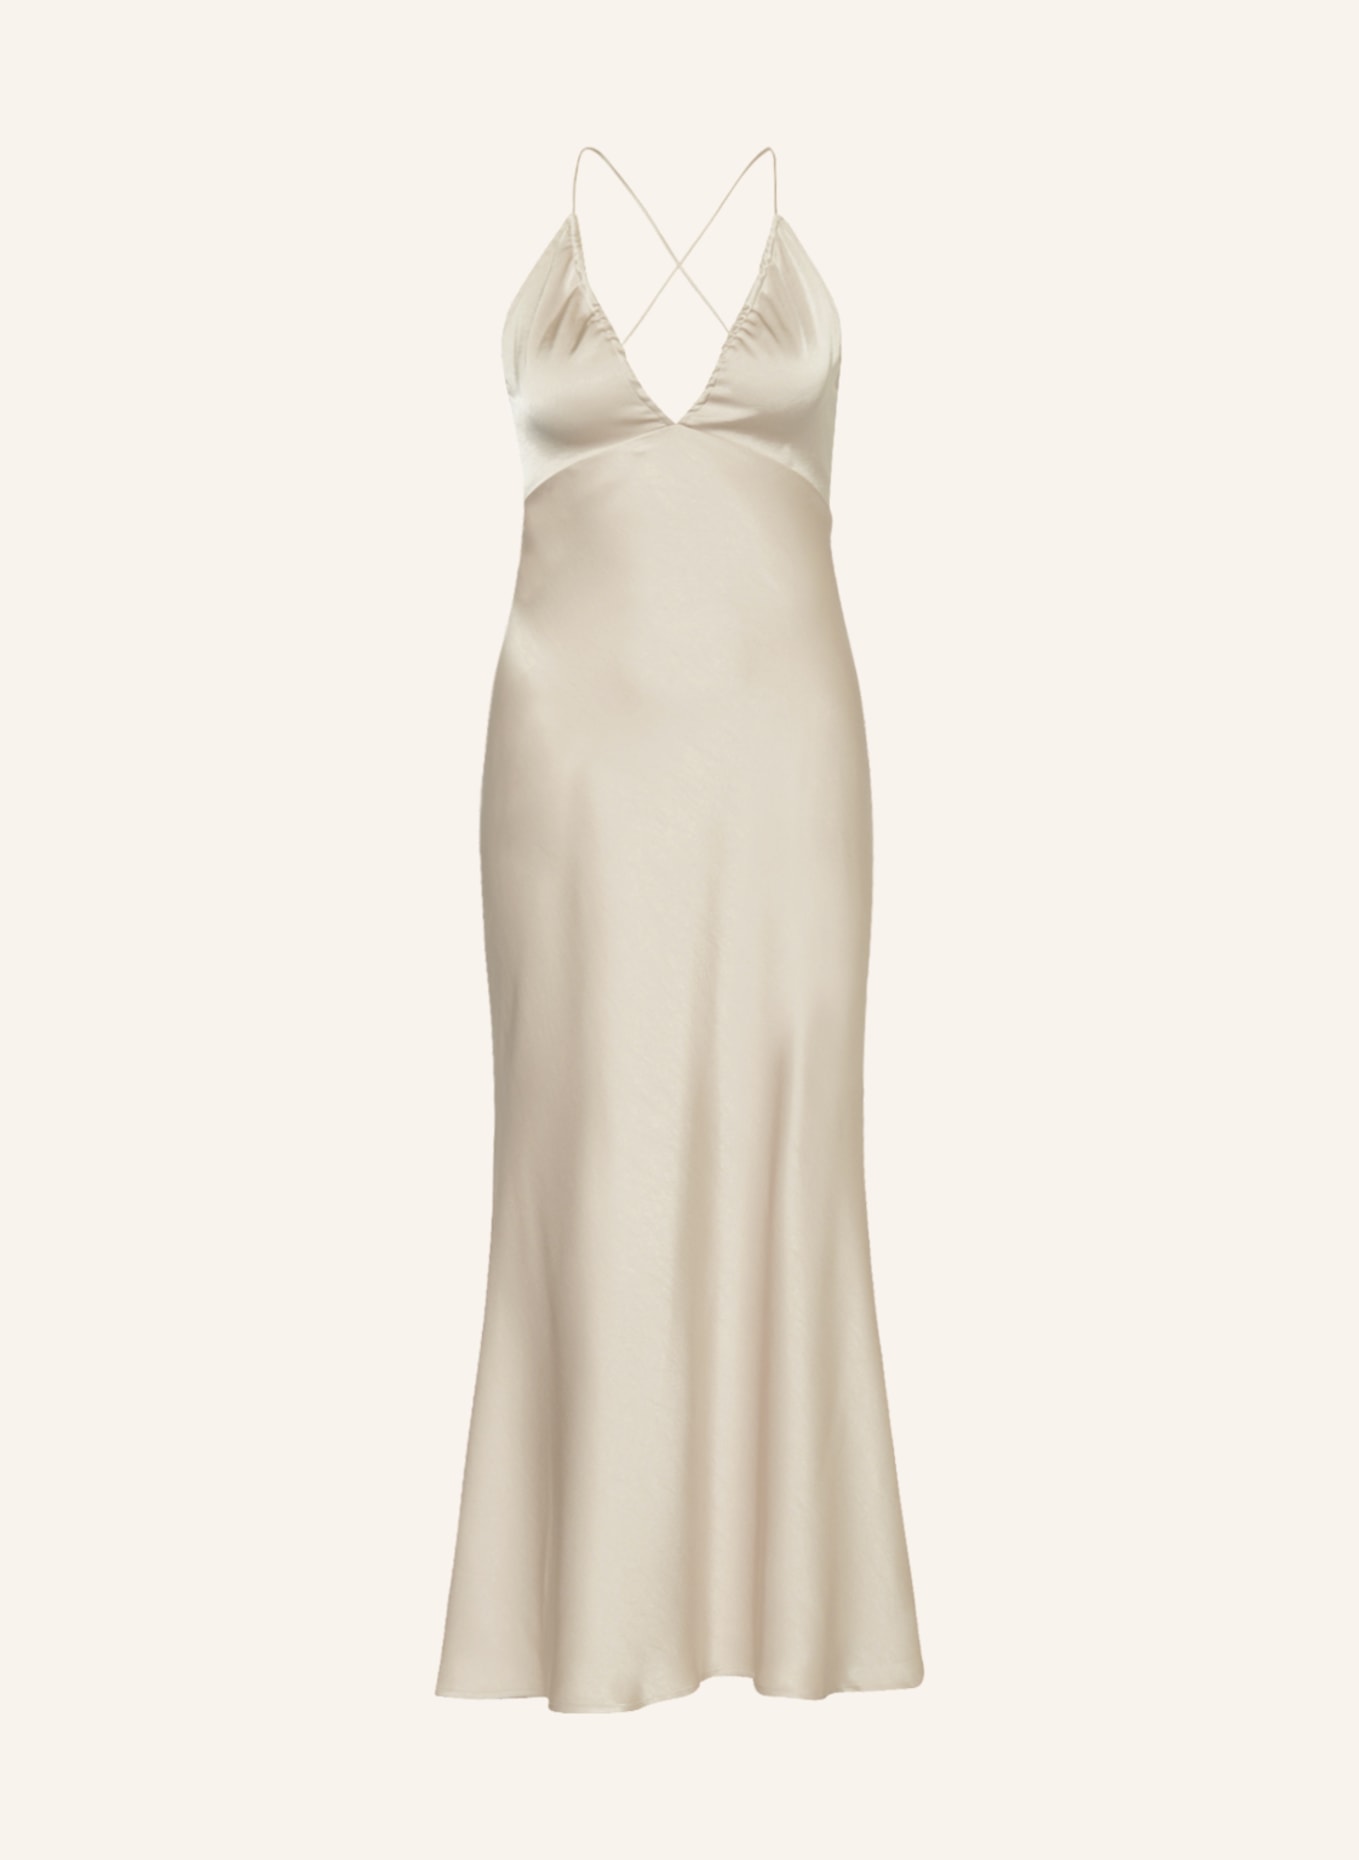 Rund ned is Misforståelse NEO NOIR Satin dress JOLLY with cut-out in nude | Breuninger